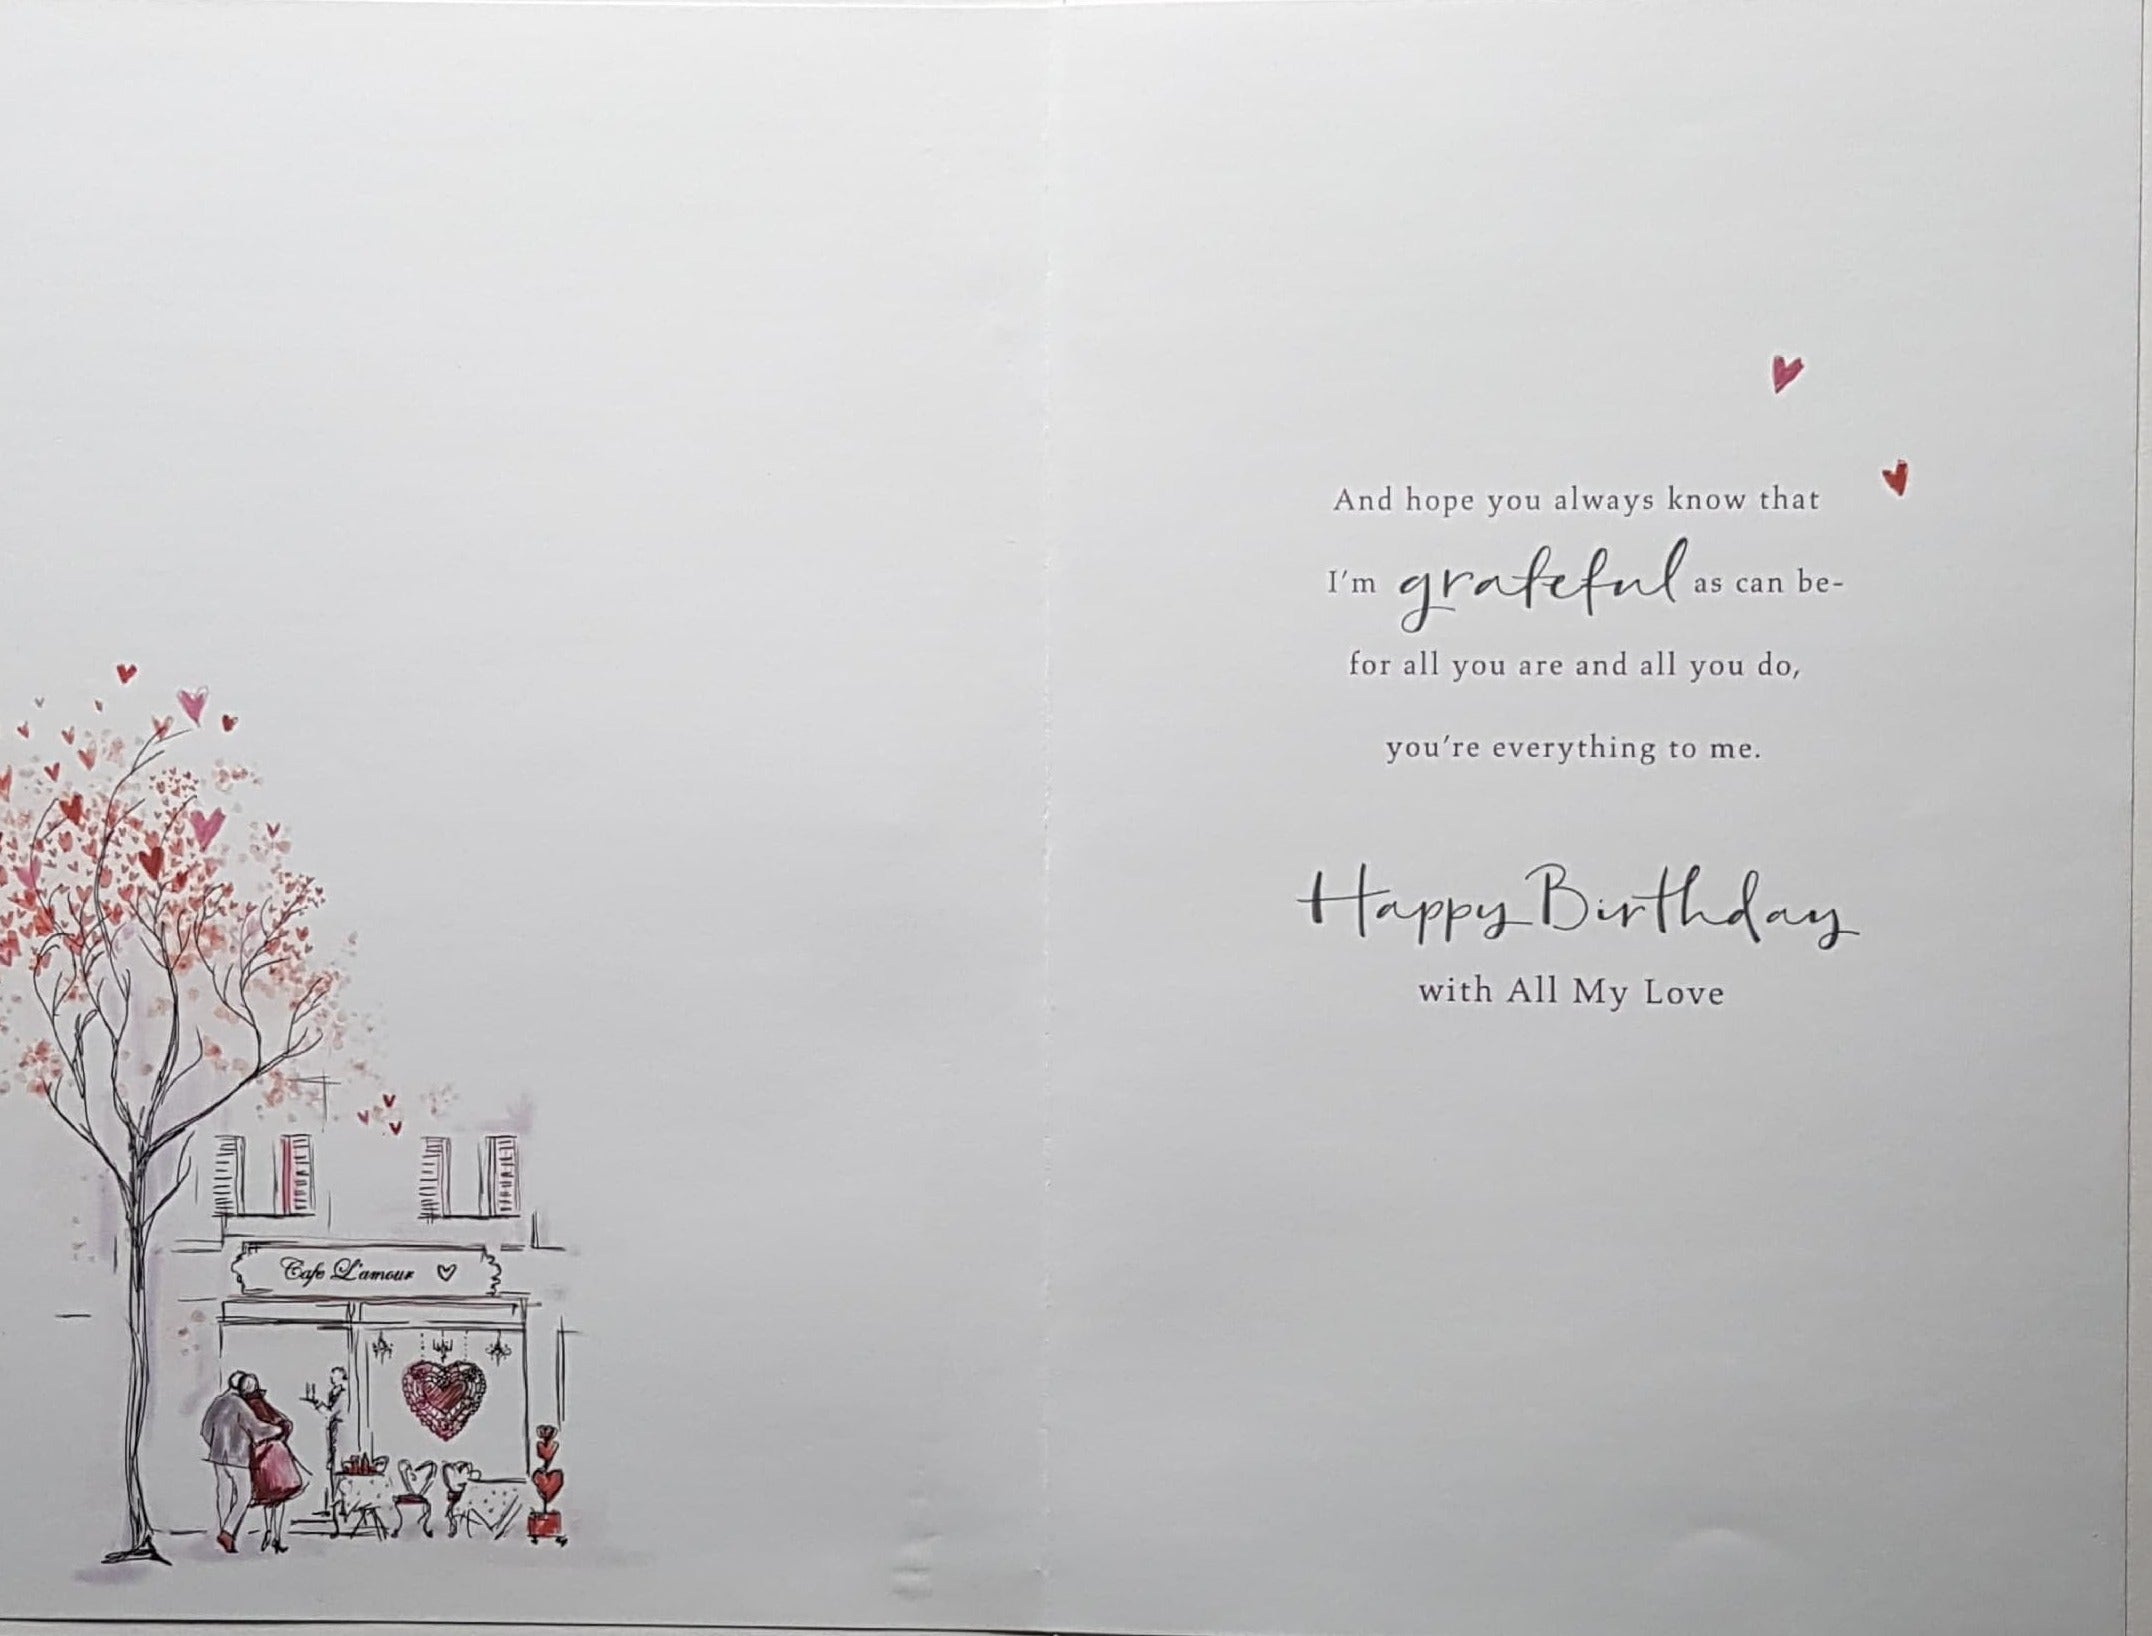 Birthday Card - Wife / A Nice Couple Walking & A Red Ribbon